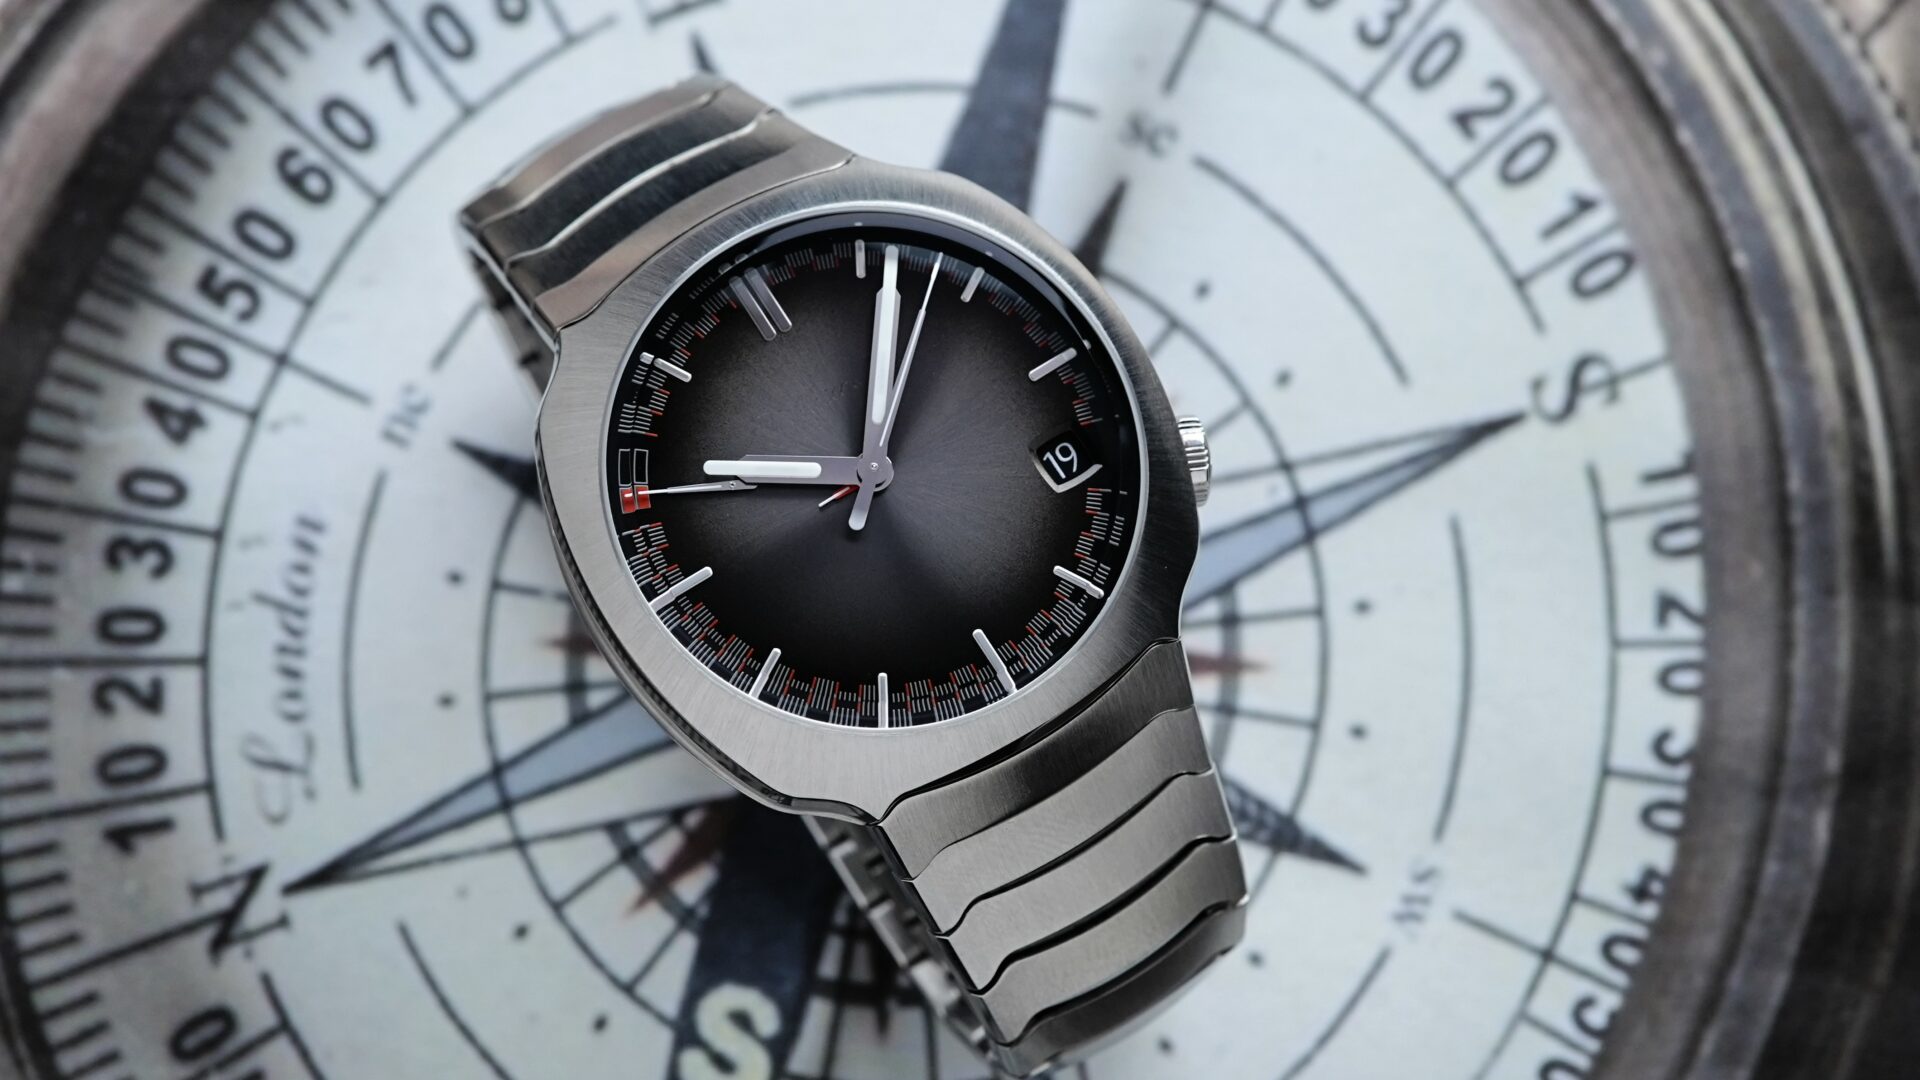 H.Moser & Cie. Streamliner Perpetual Calendar 6812-1200 watch featured on compass background.